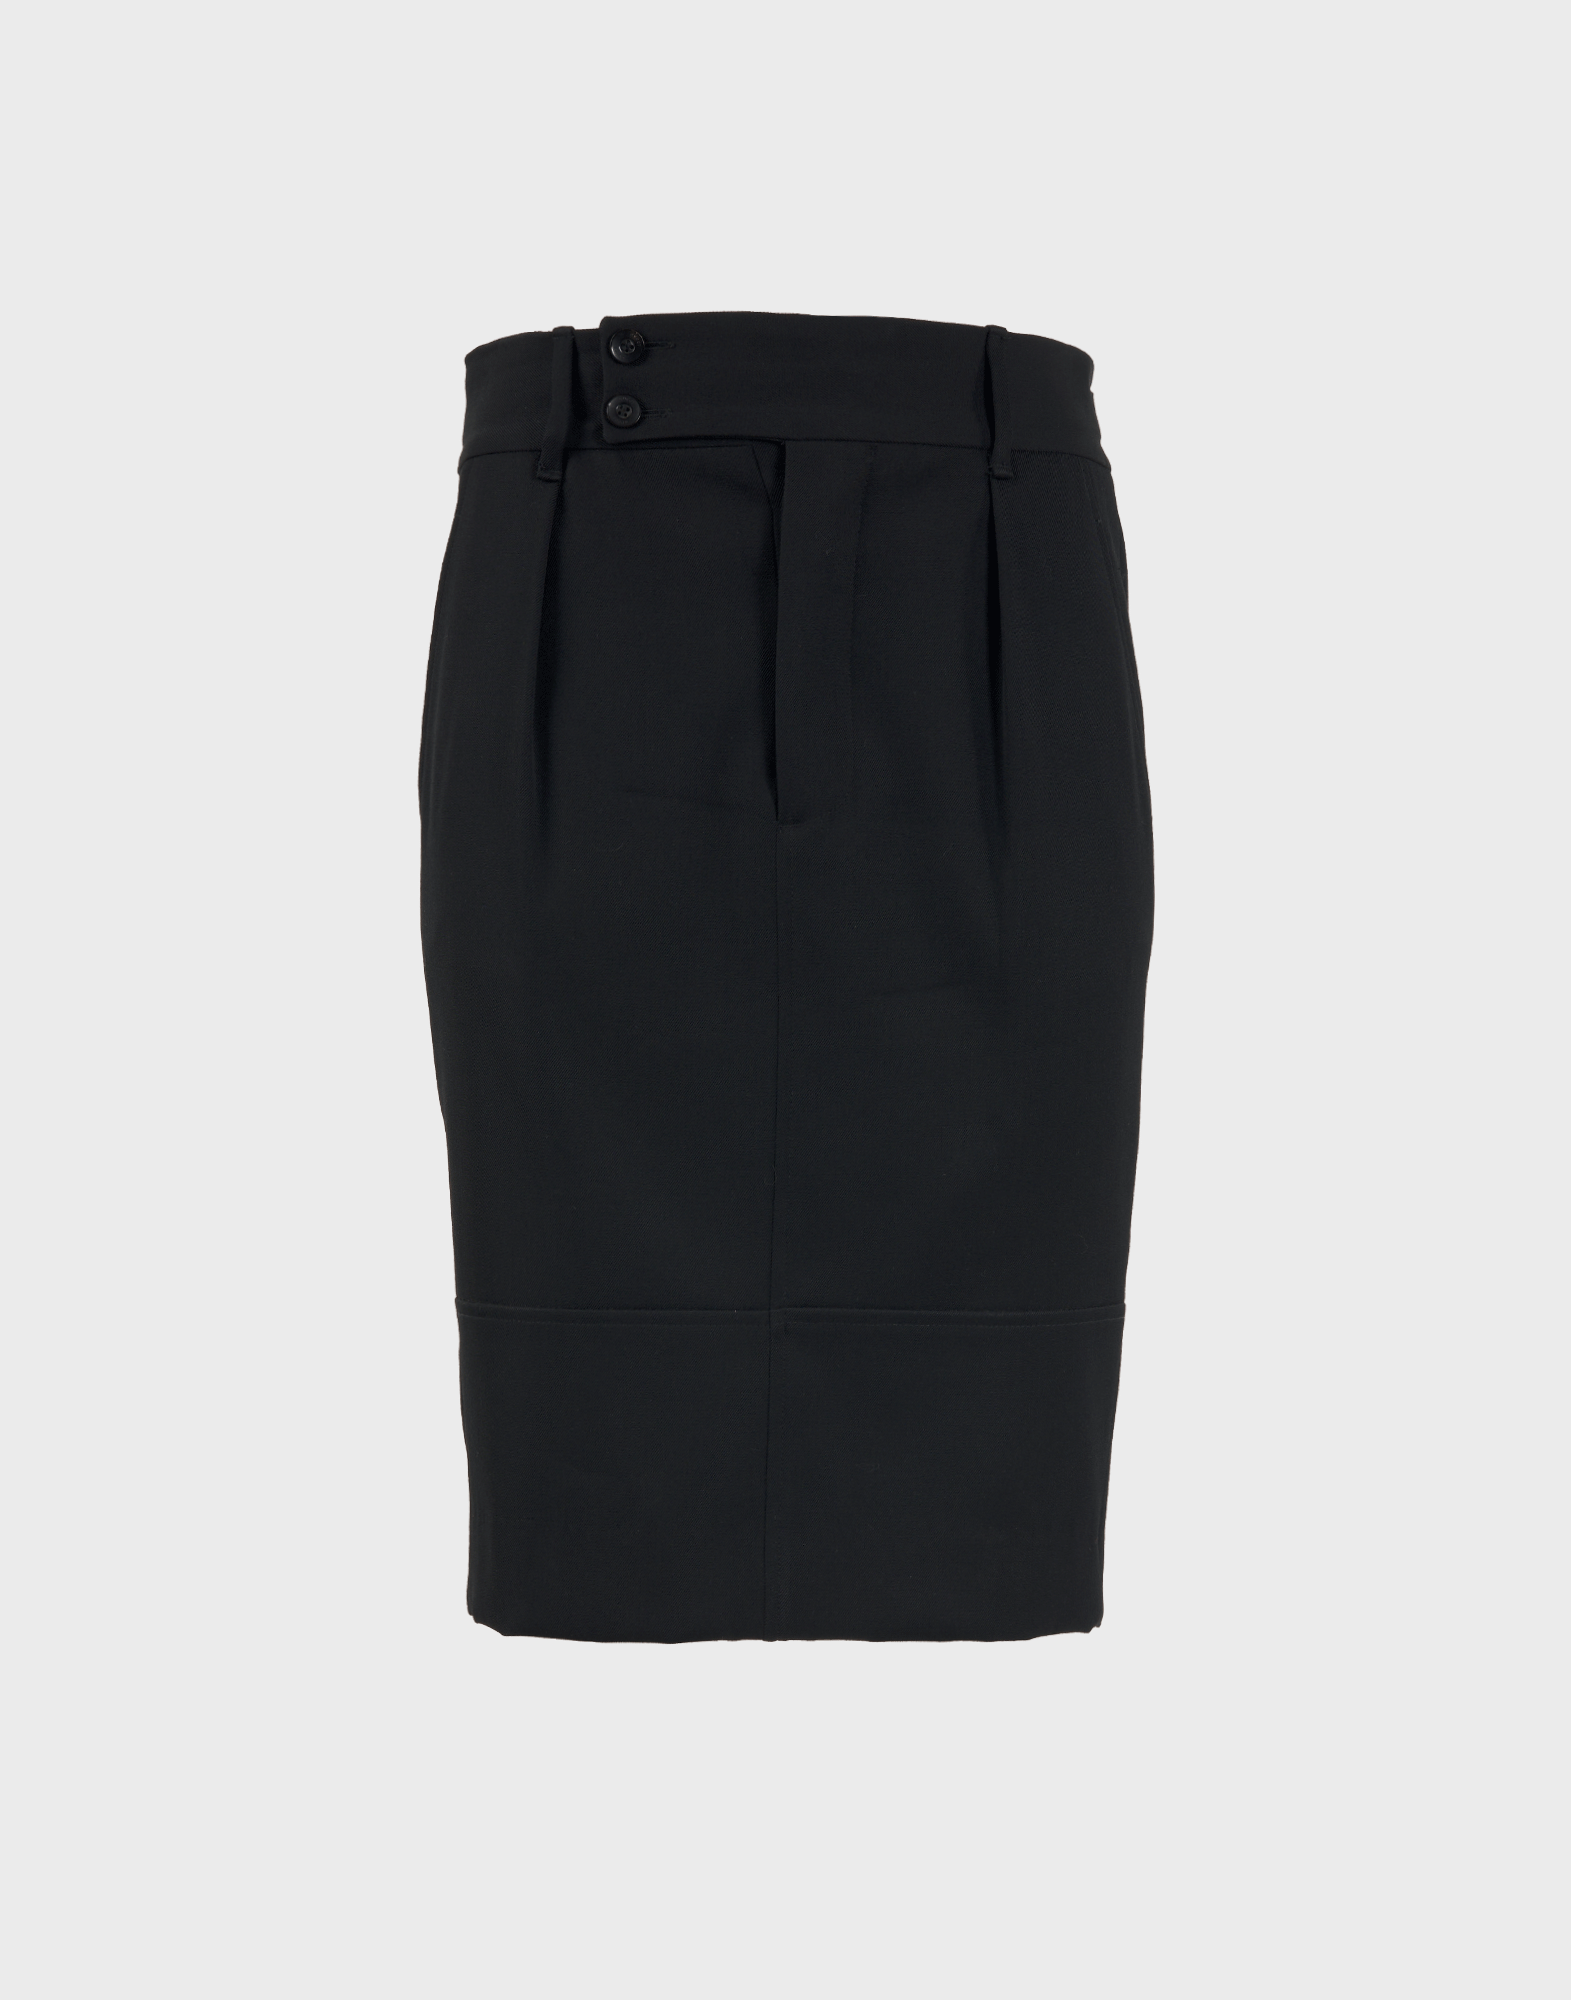 black gucci pencil skirt in wool with back slit and two pockets